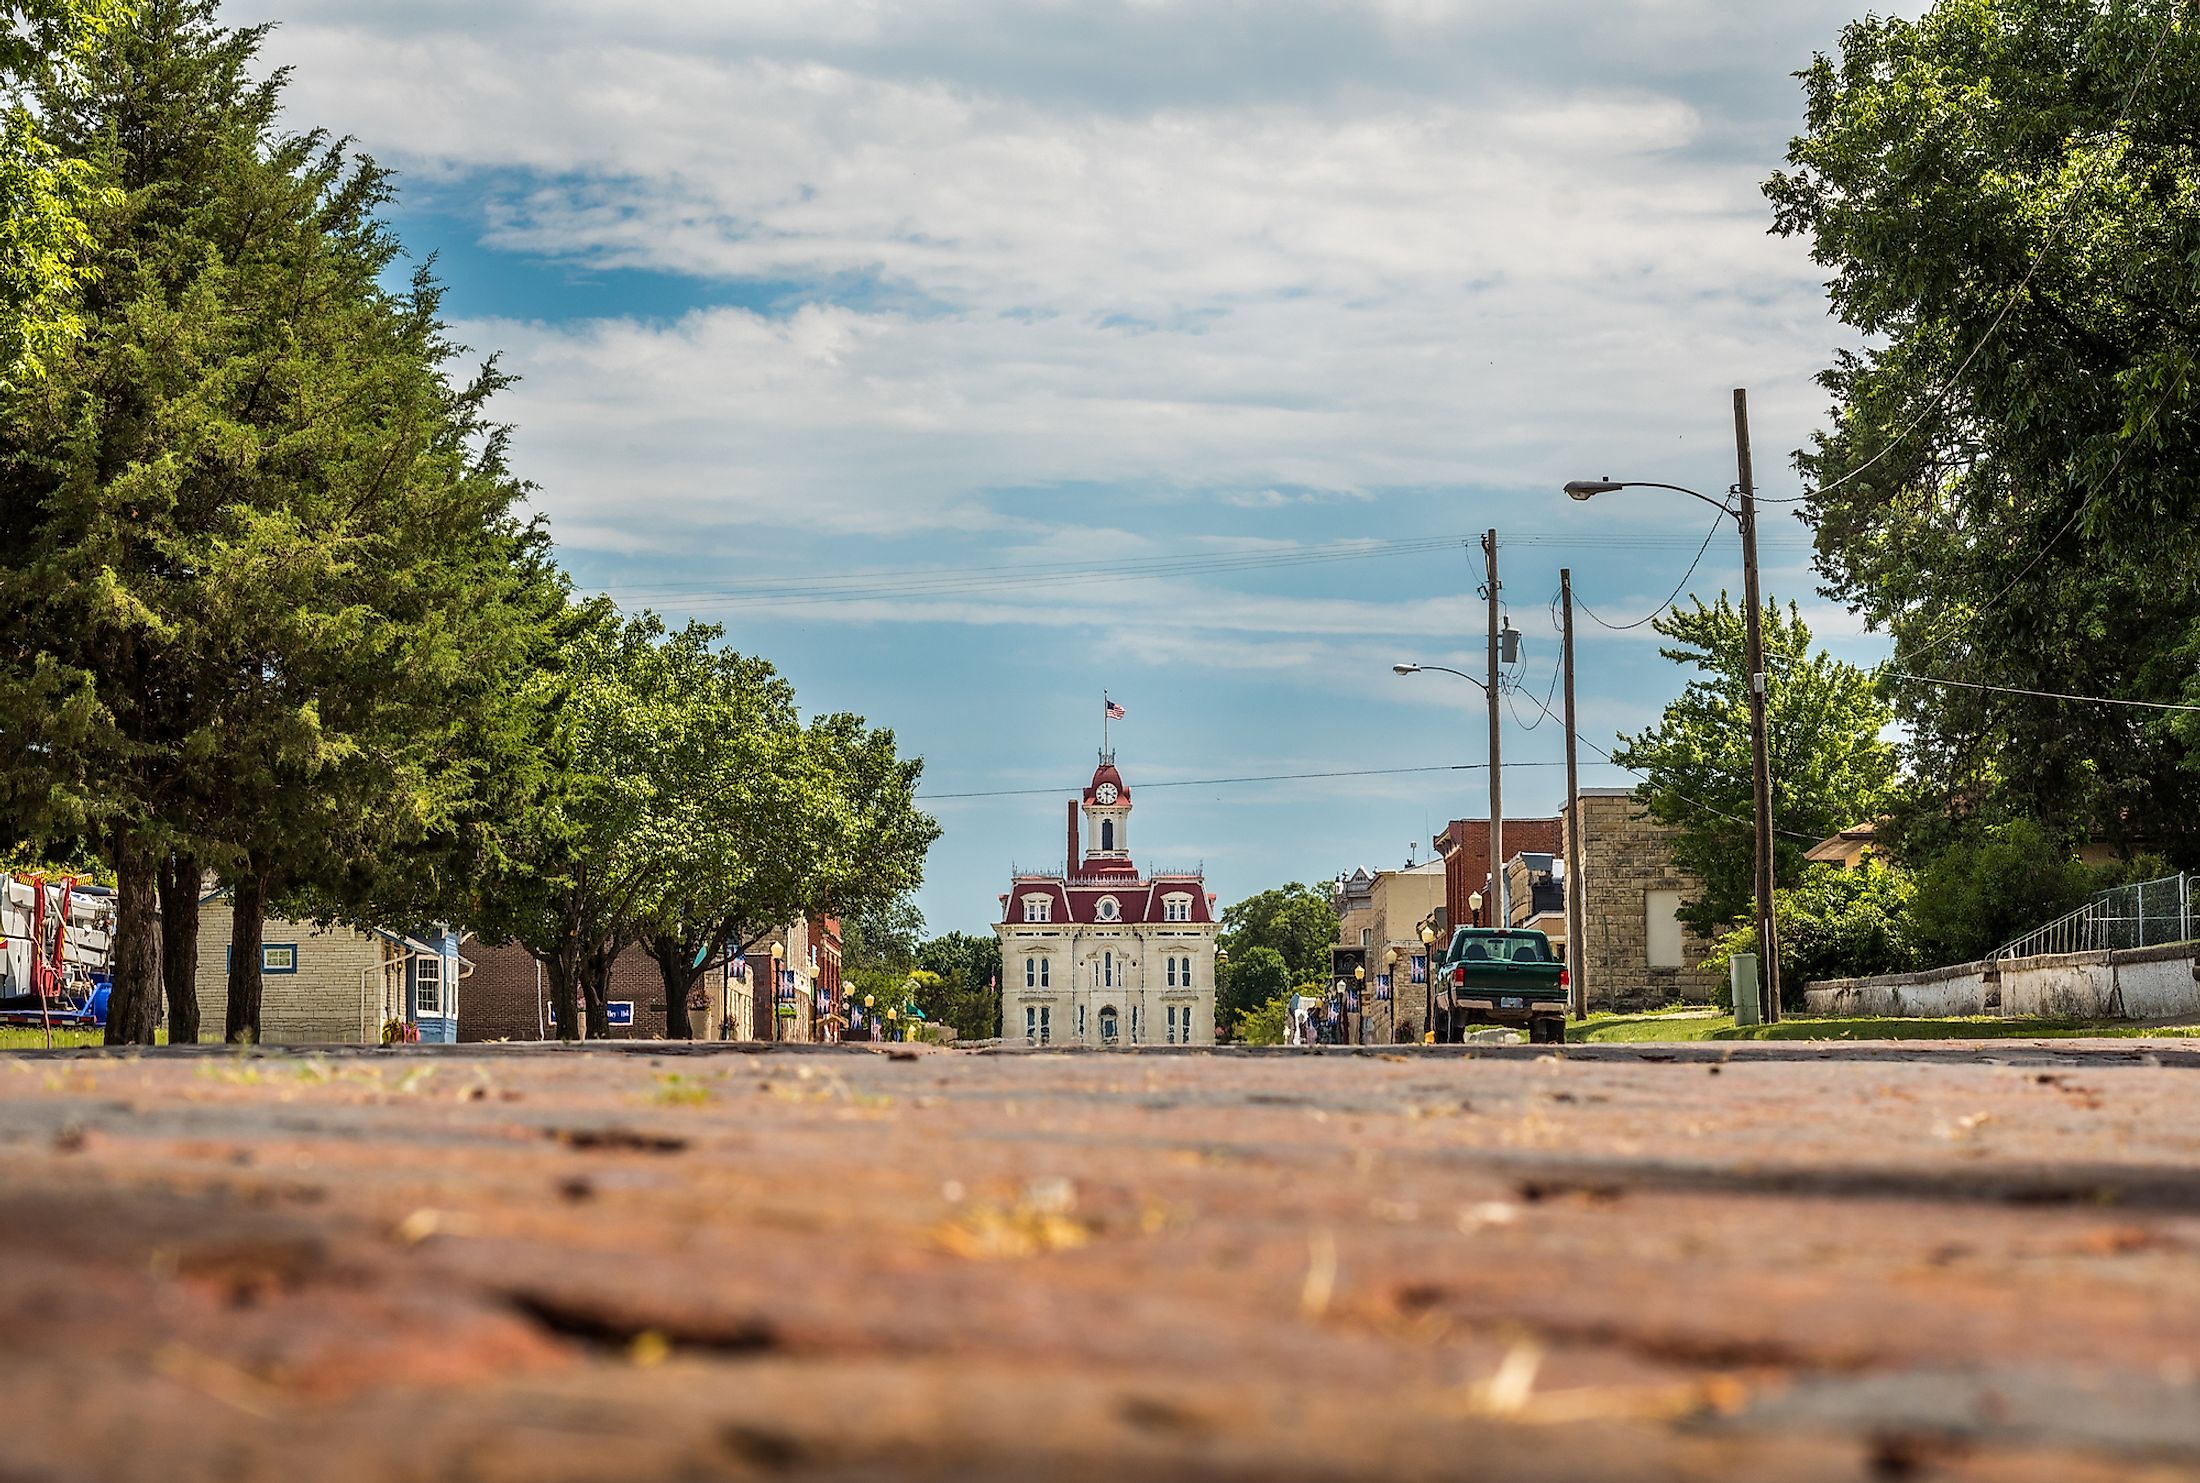 Old downtown area of Cottonwood Falls, KS with the courthouse at the end.